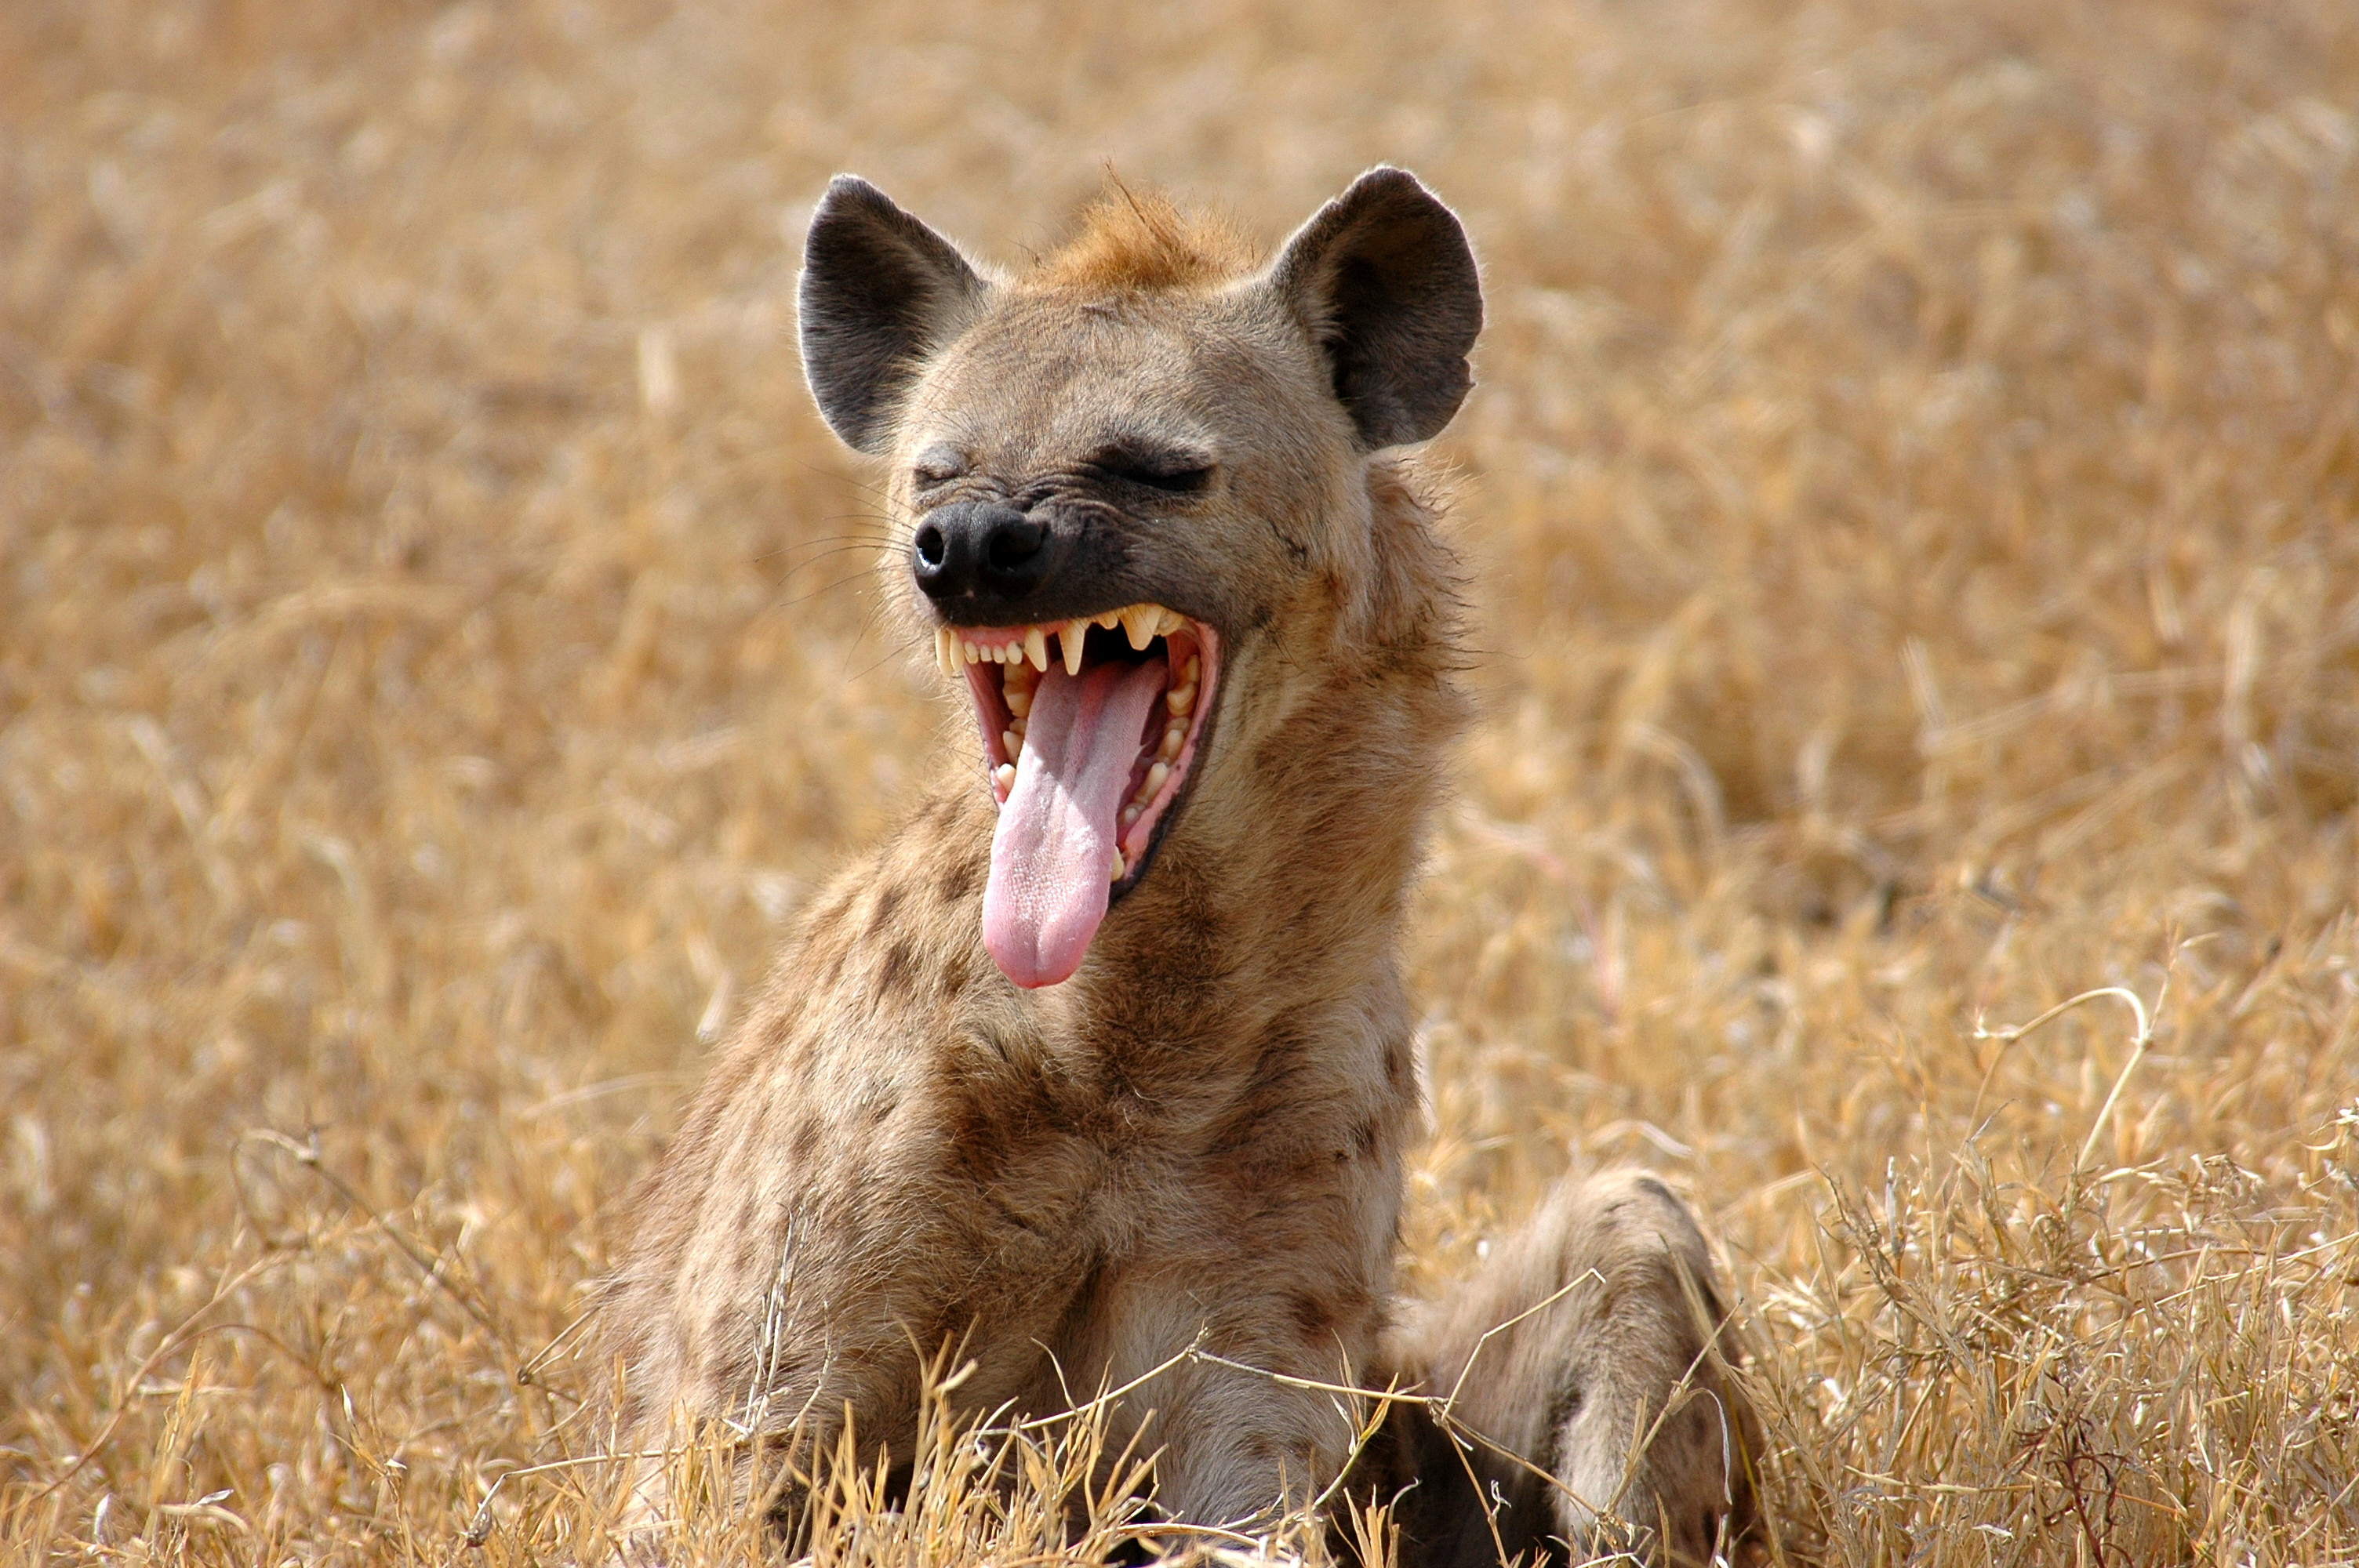 Candidate's Plan to Export Hyena Testicles Causes Pandemic Alarm Among Vets